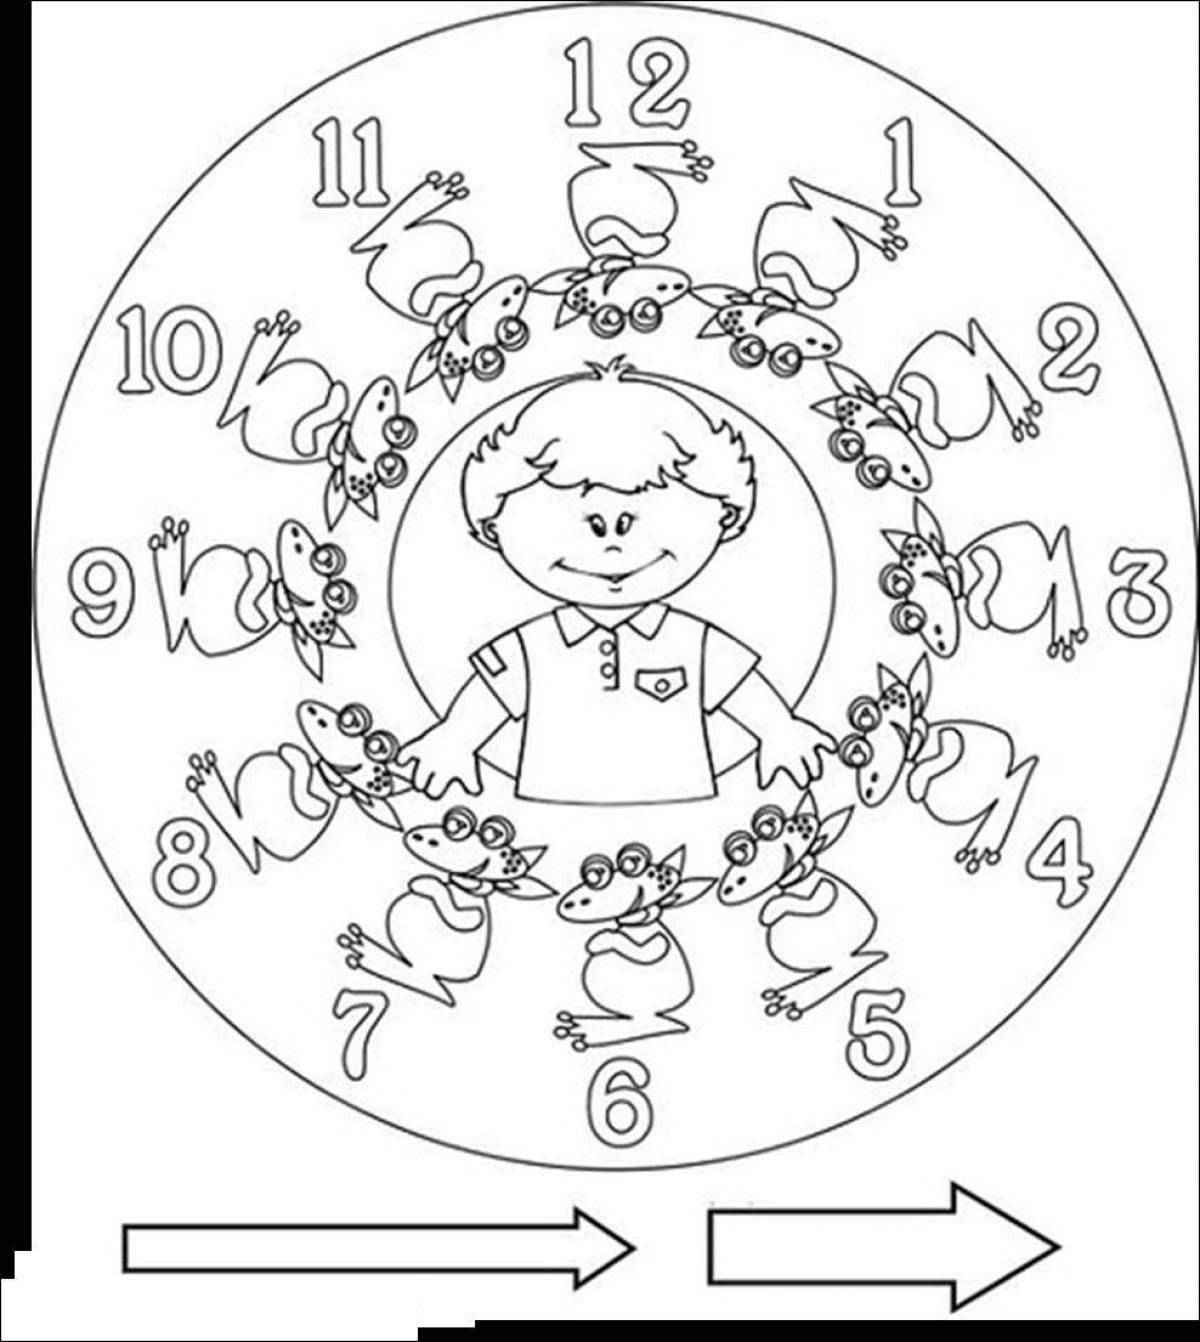 Photo Coloring book daily routine Grade 1